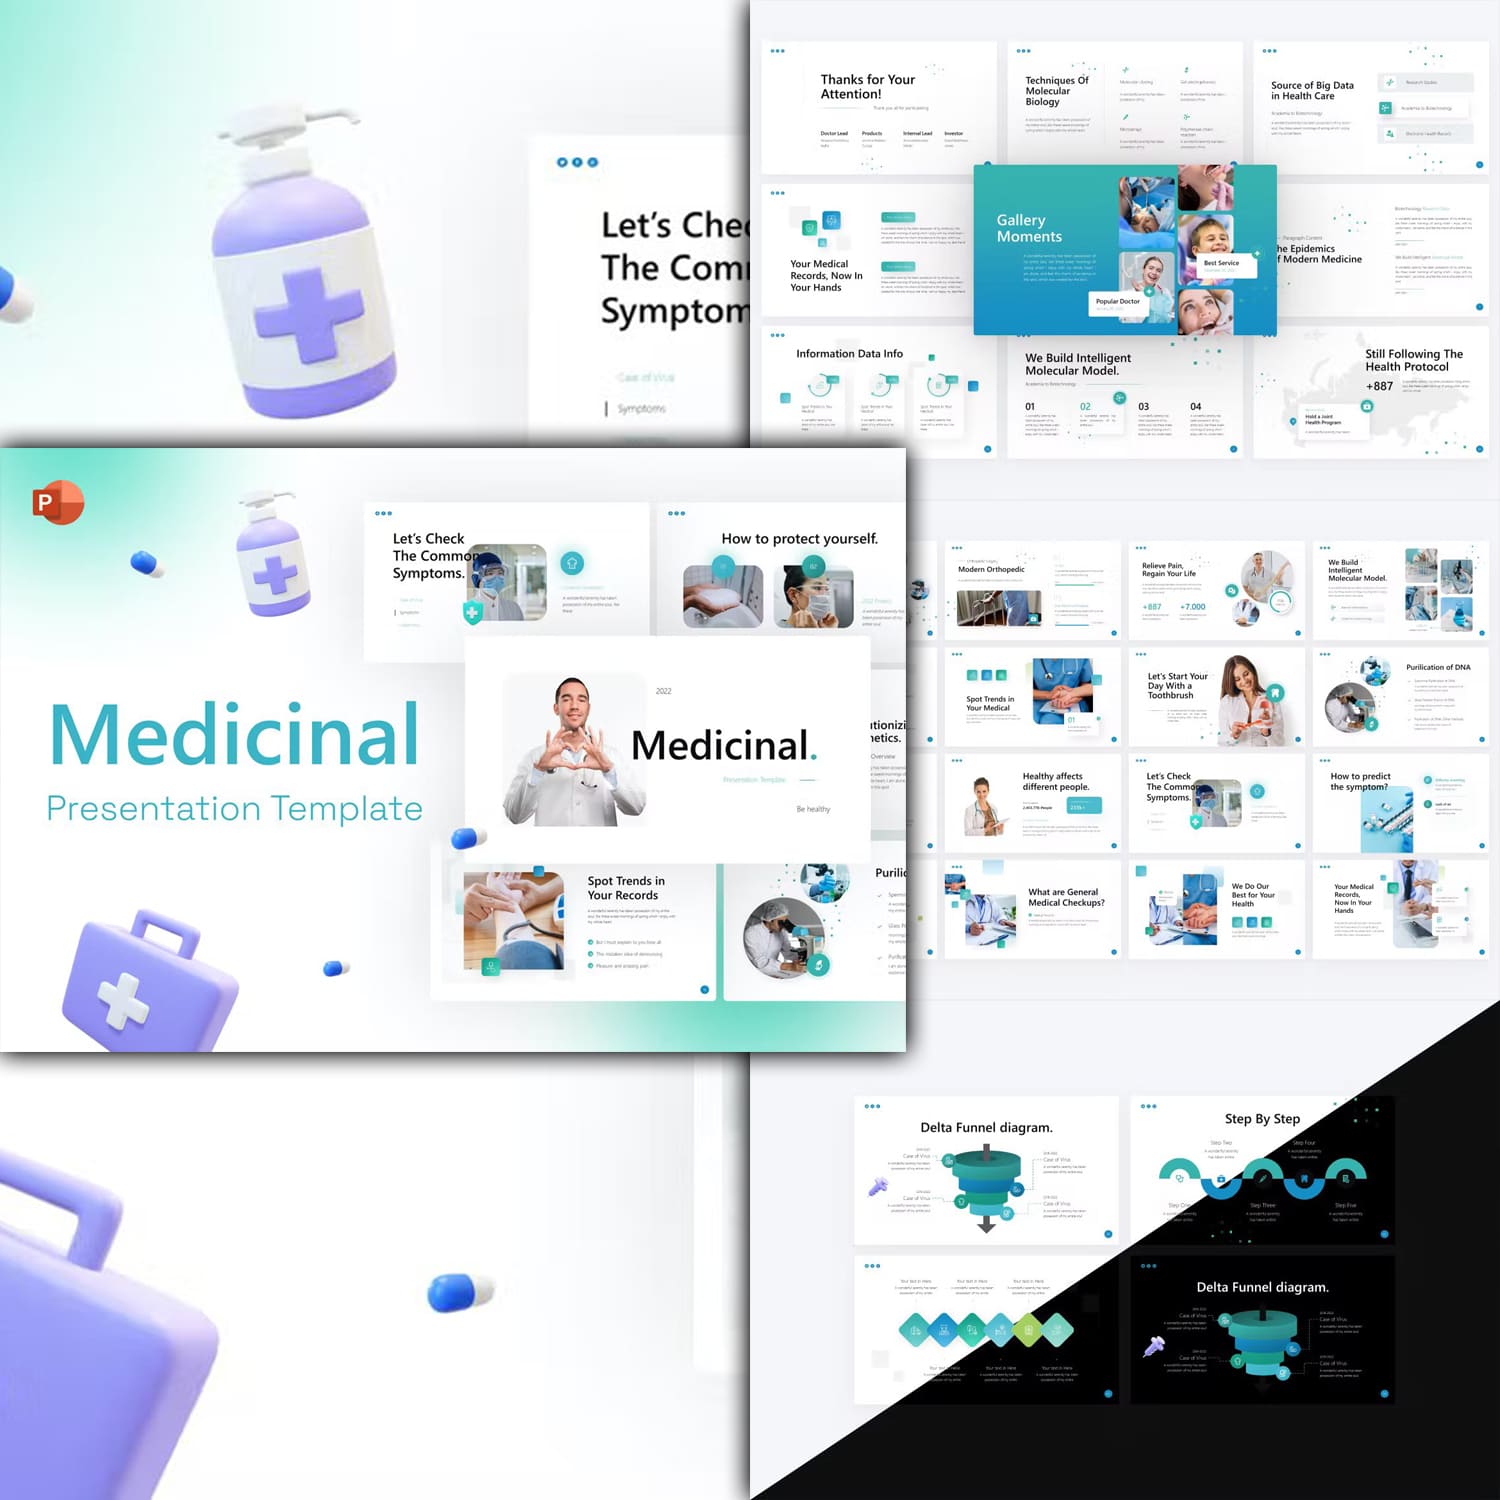 Medicinal 3d illustration powerpoint template from BrandEarth.